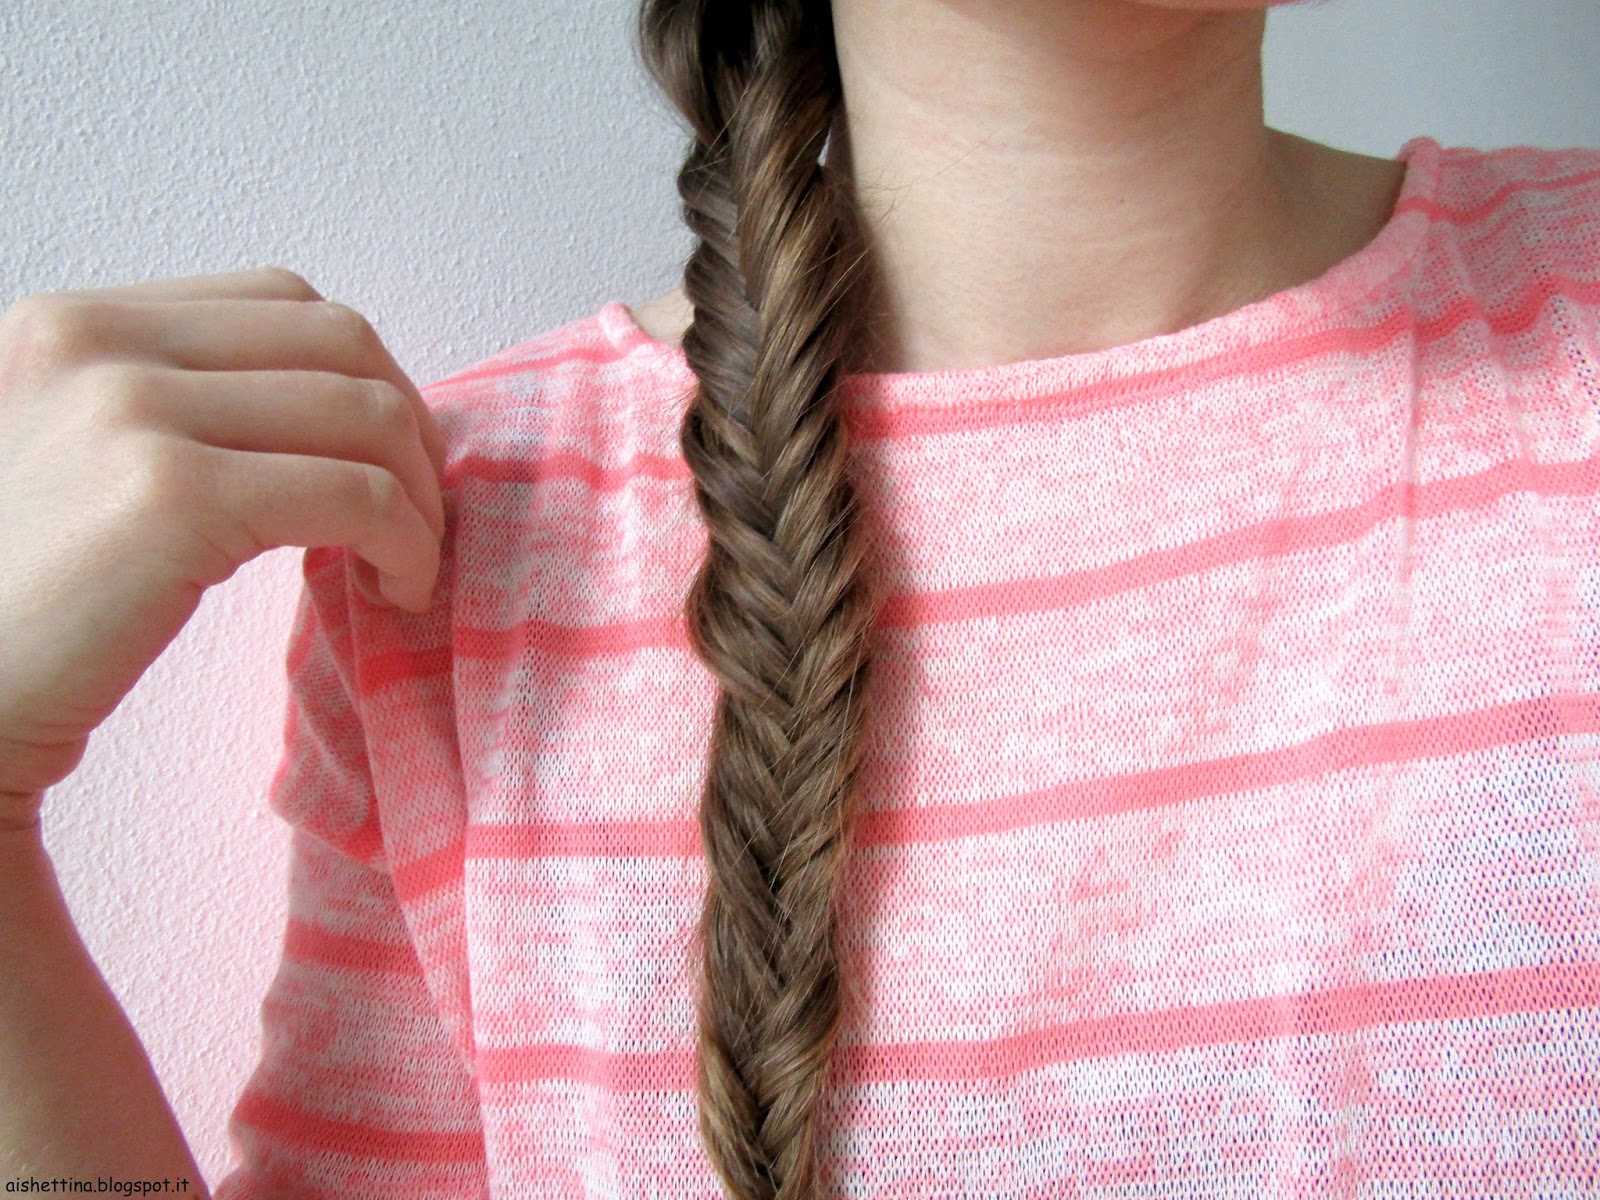 Fishtail braid: how to do it and my favourite styling products - Aishettina